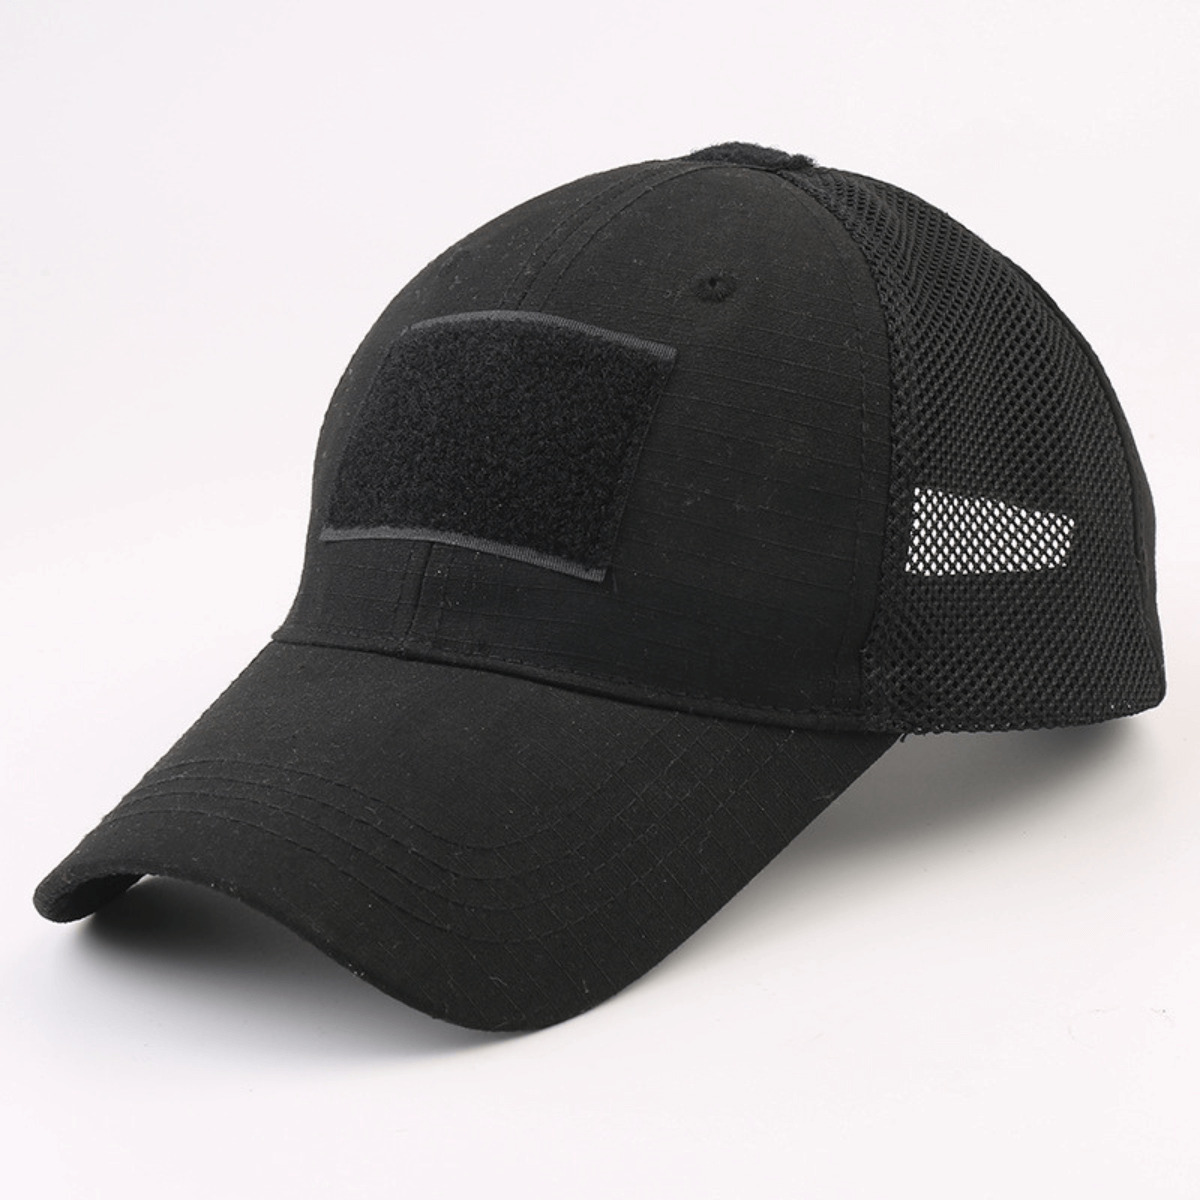 Tactical-Style Patch Hat With Adjustable Strap - Black